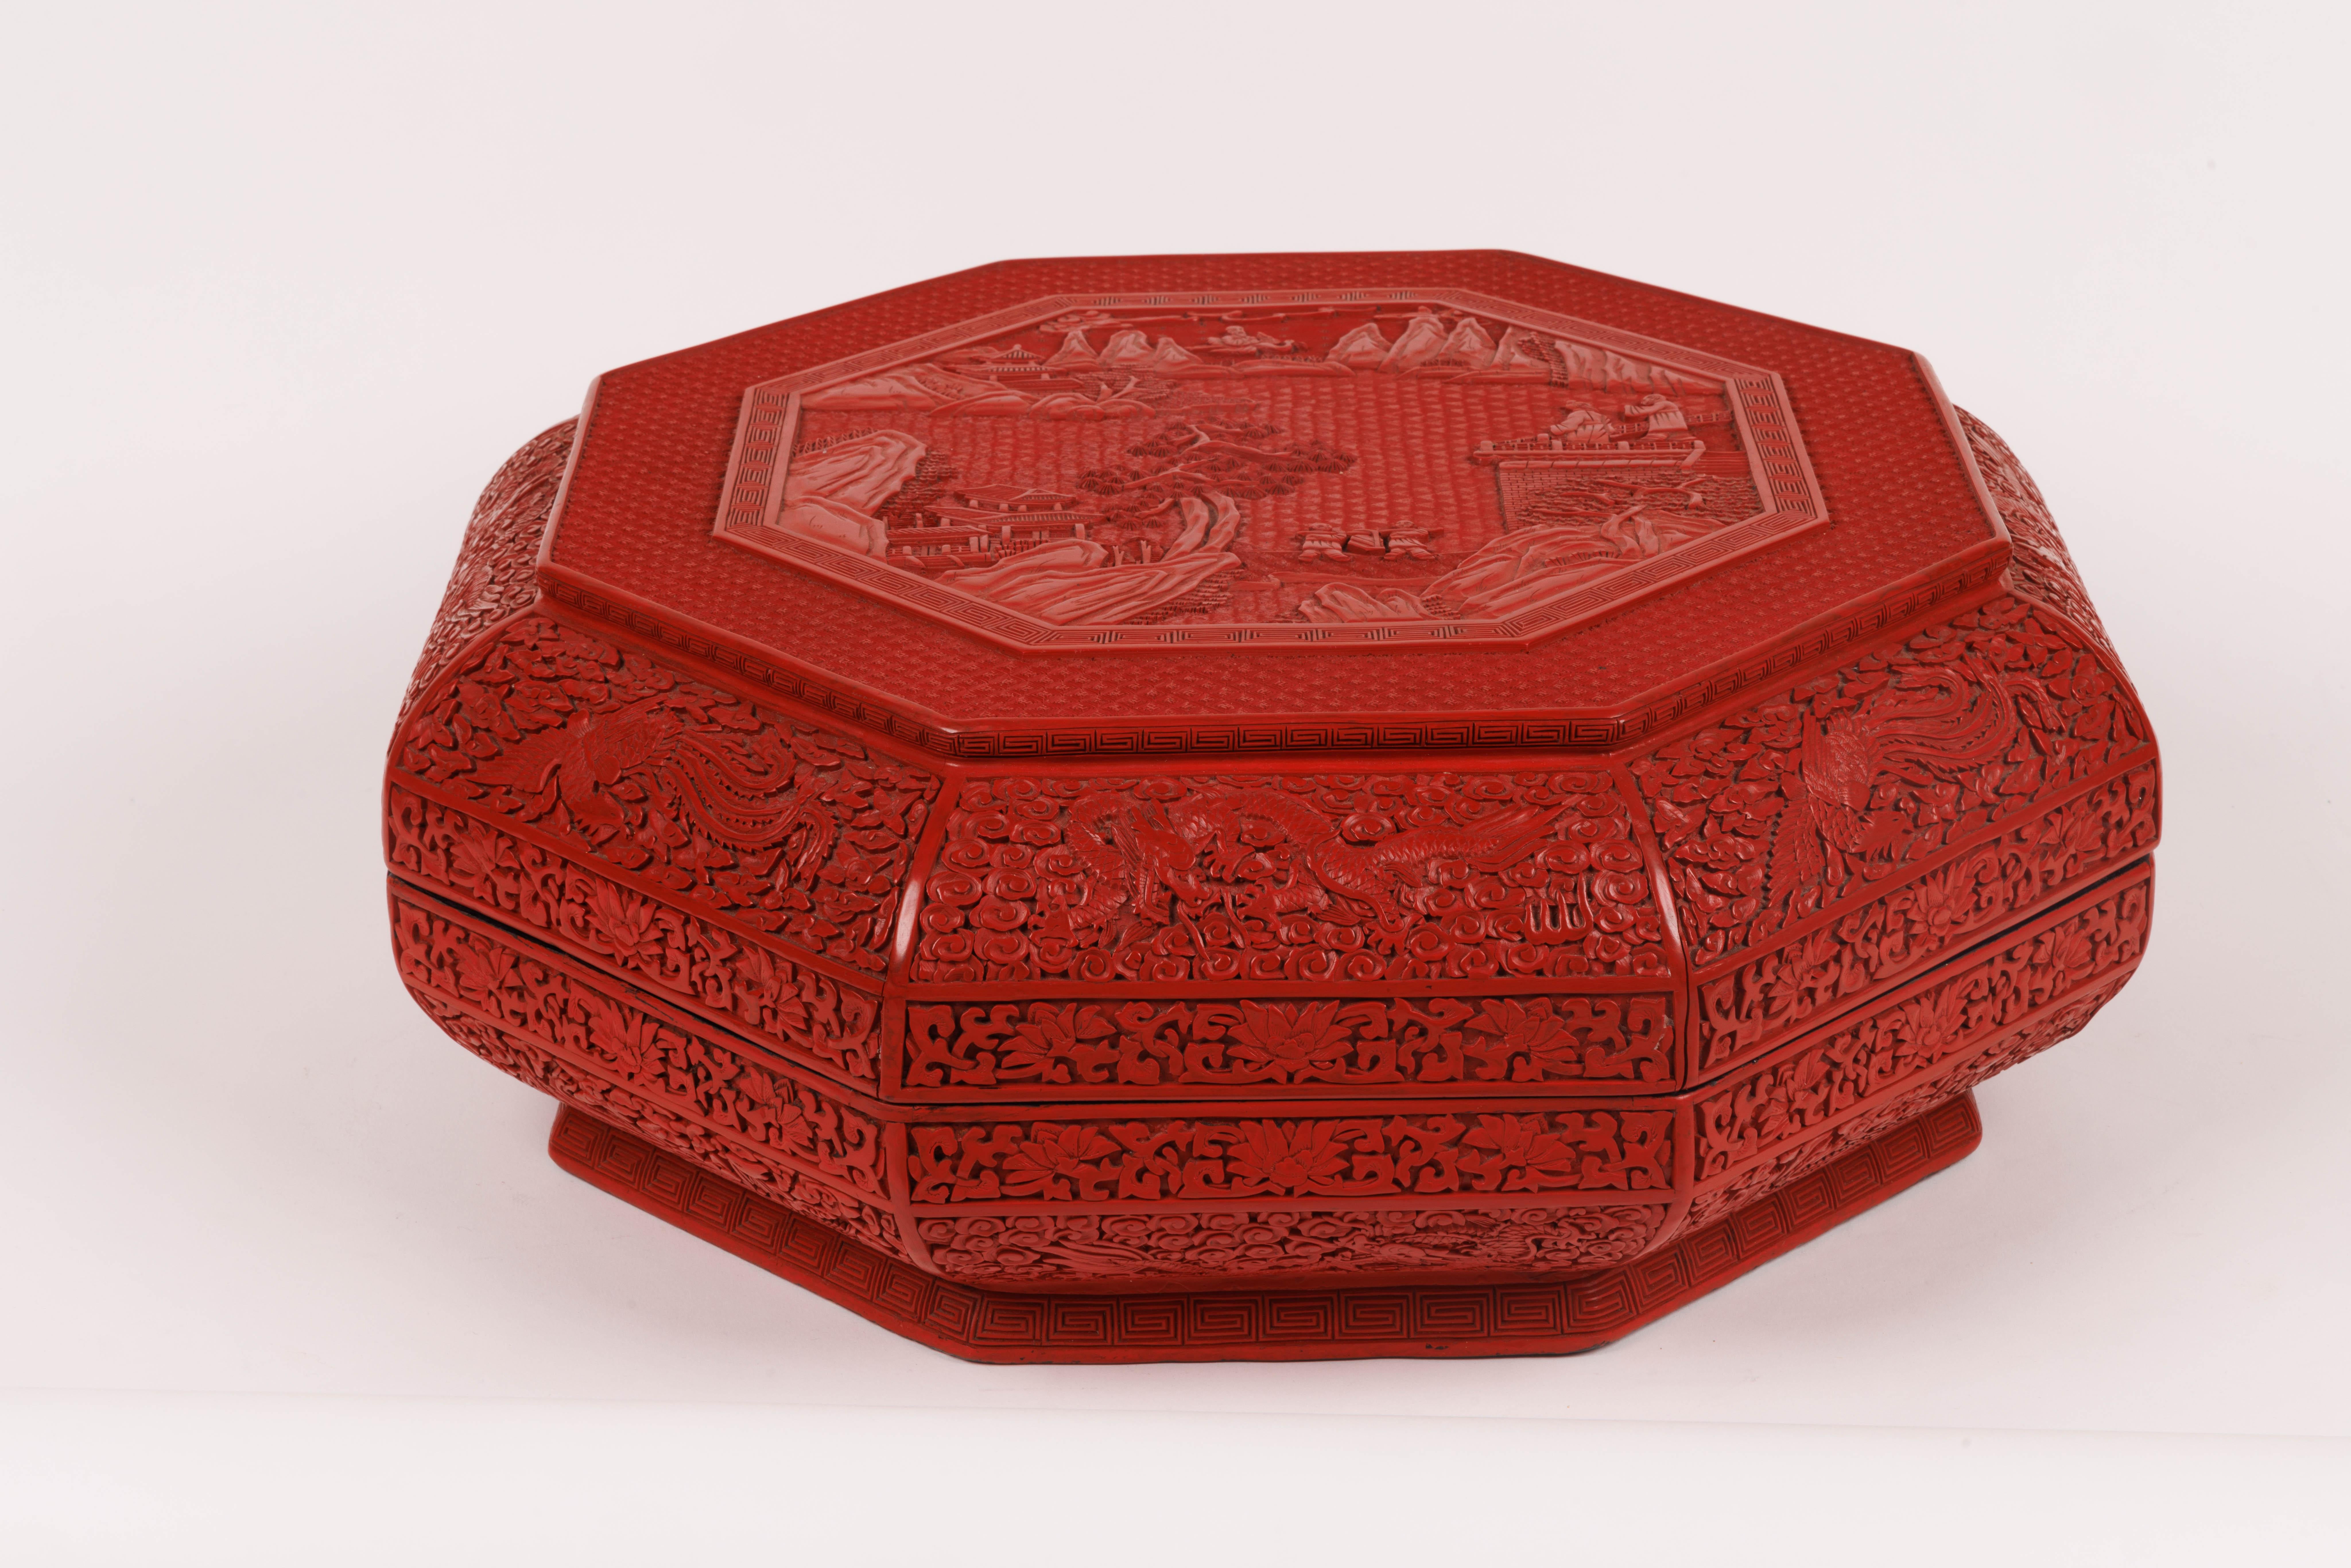 A rare palace size Chinese carved cinnabar lacquer figural box and cover, Qing Dynasty

This palace size box and cover is a rare and exquisite piece of art made in the 19th century during the Qing Dynasty, which was known for its artistic